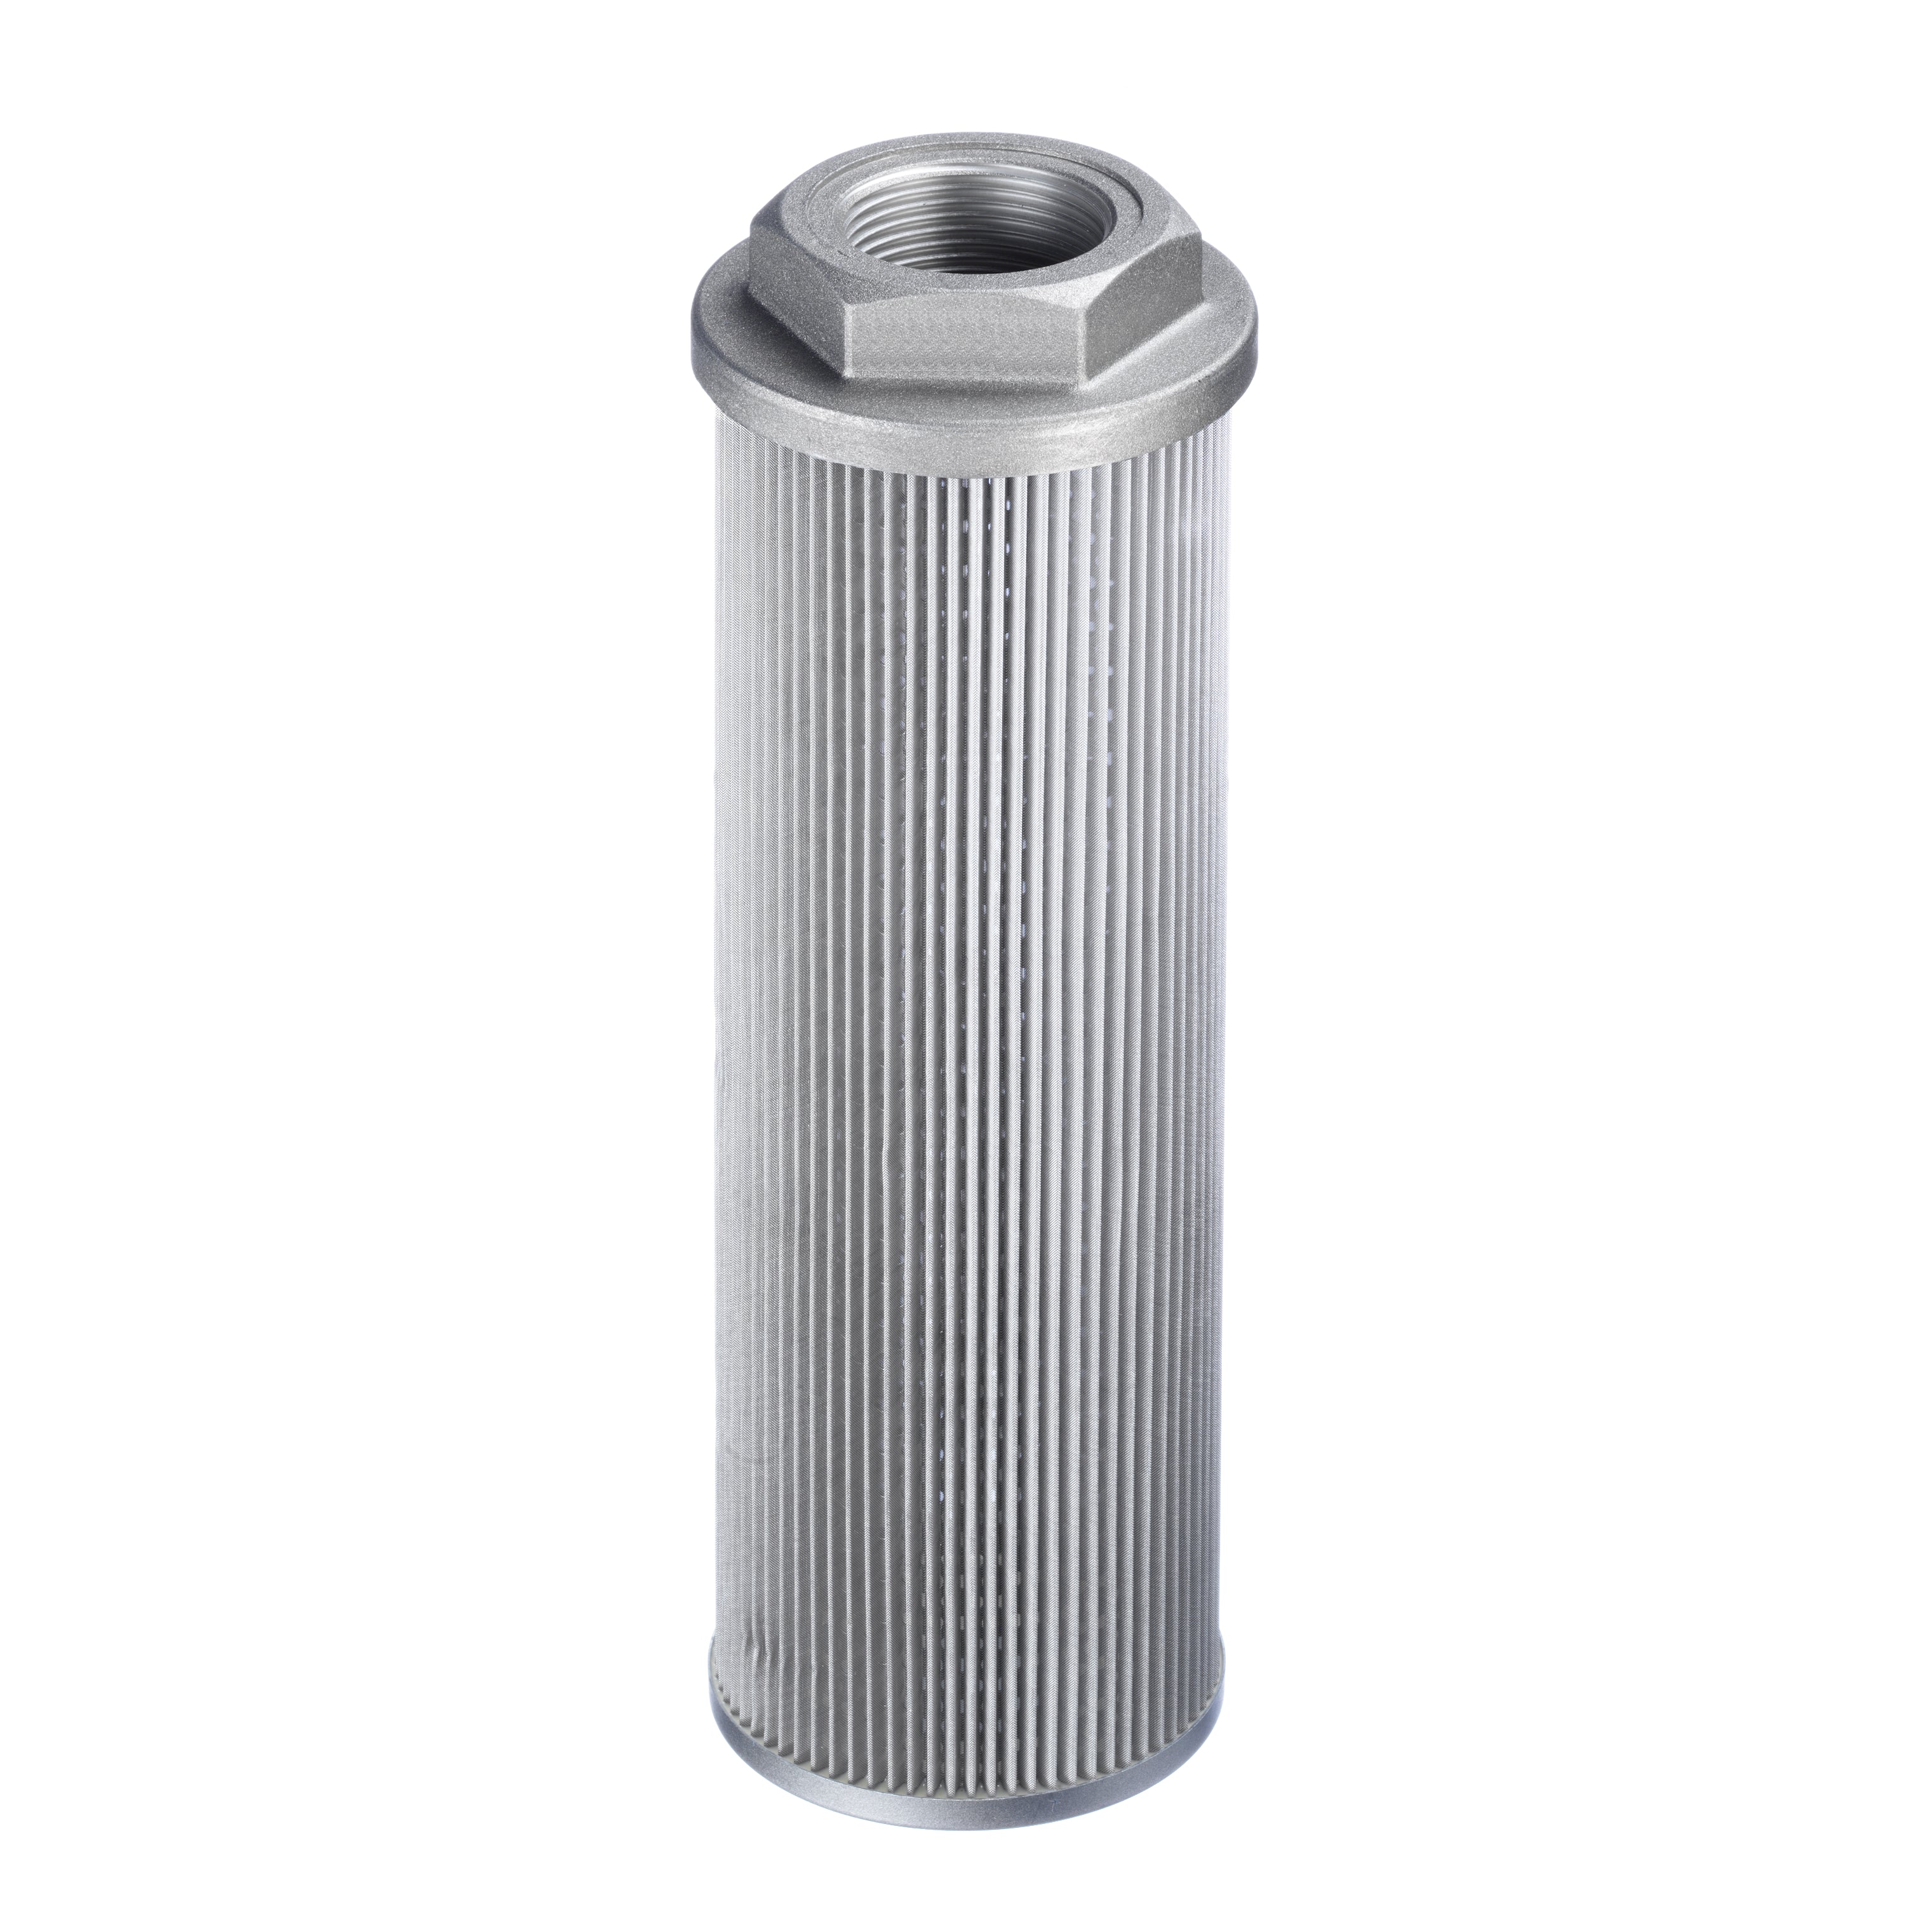 SUS-150-N48-272-125-A-O : Stauff Suction Strainer, Aluminum End Cap, 3" NPT, 104GPM, 125 Micron, No Bypass